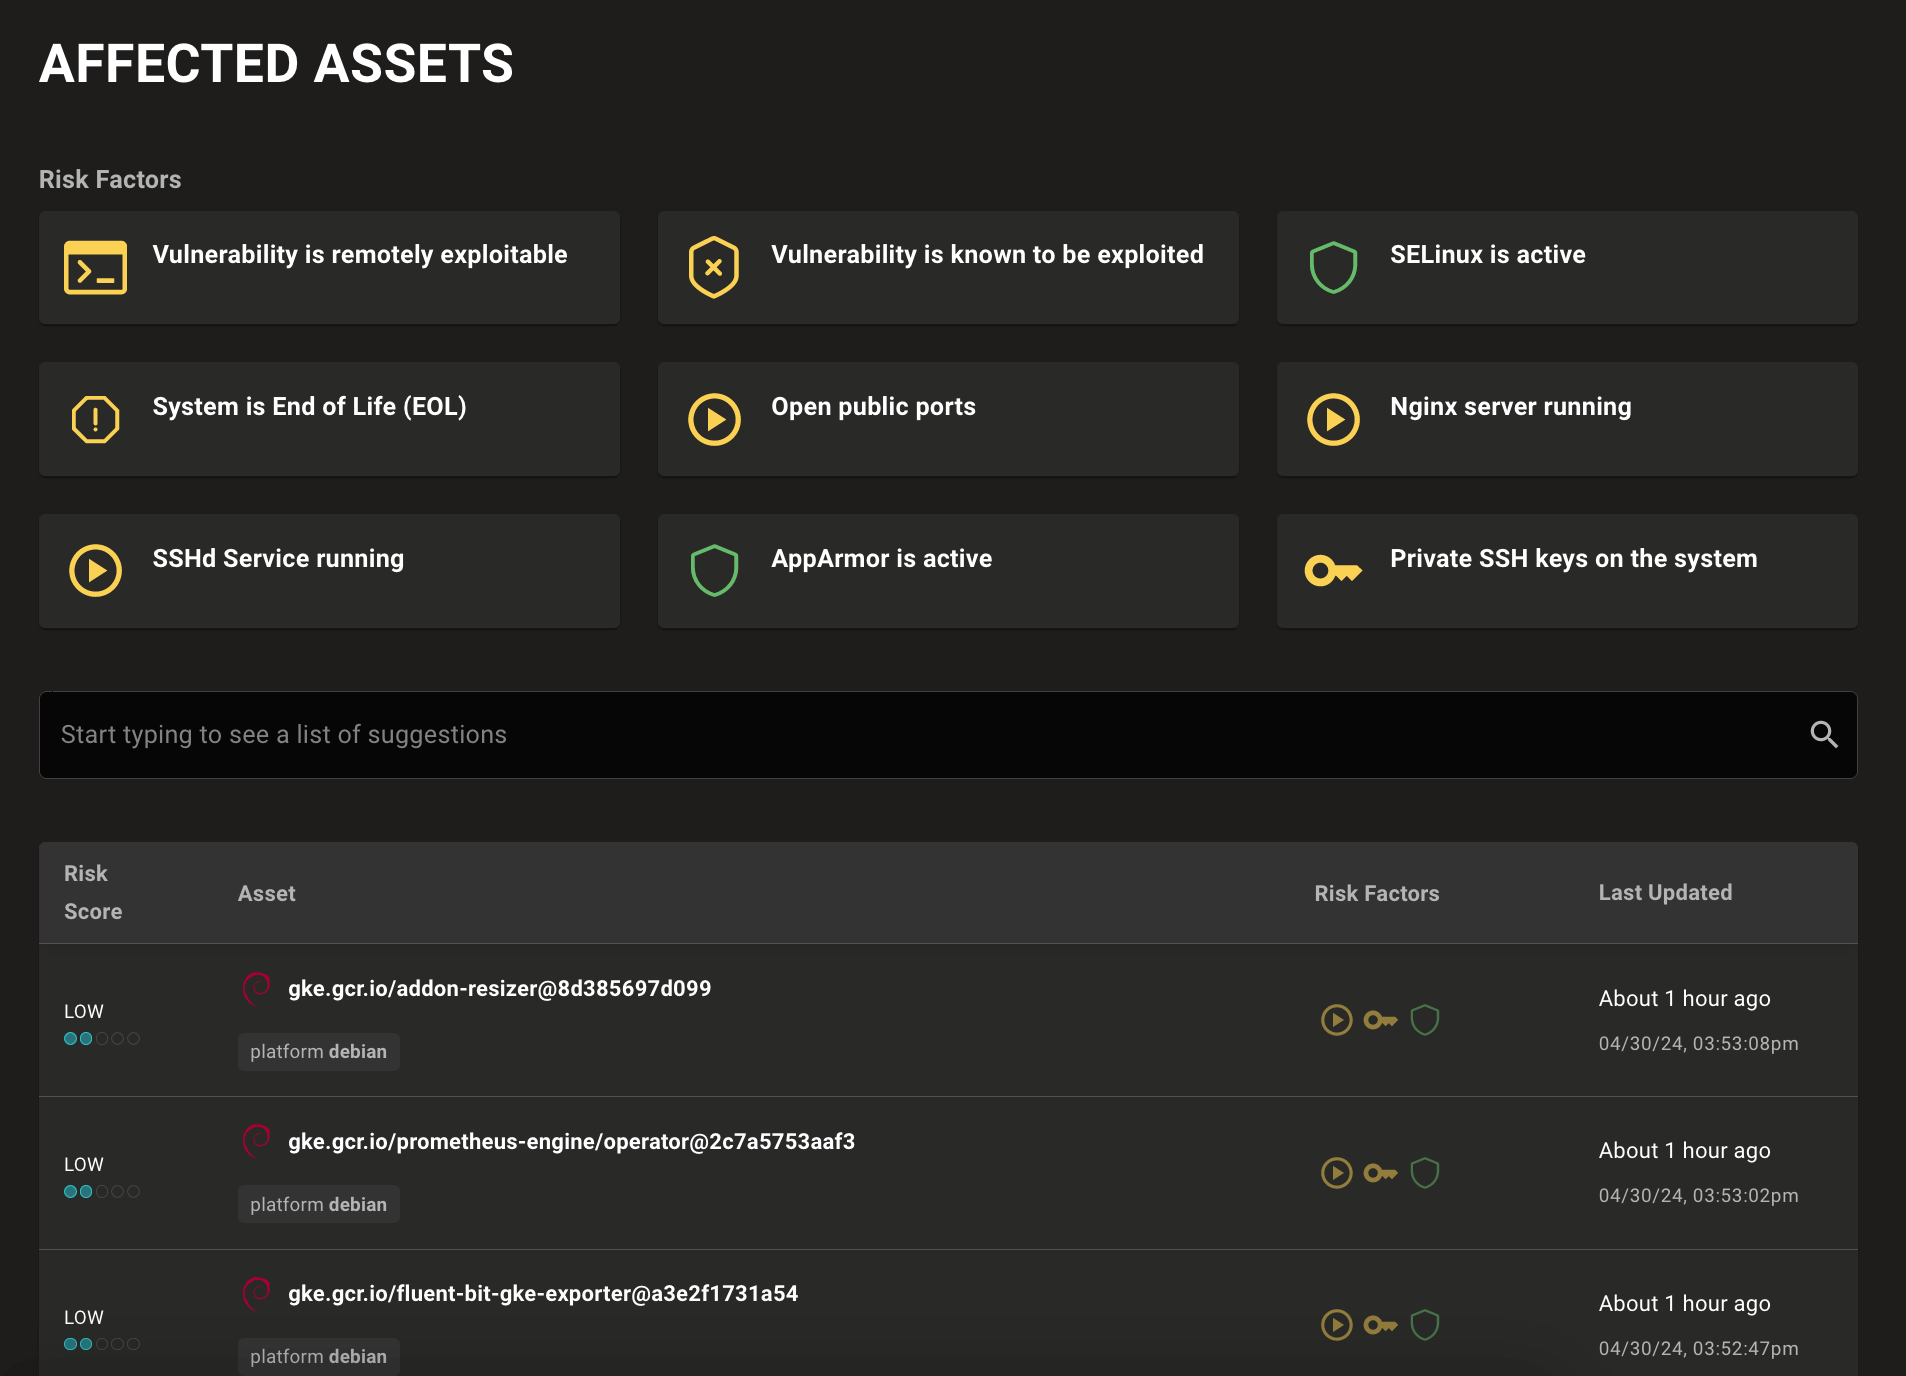 Vulnerabilities Affected Assets page